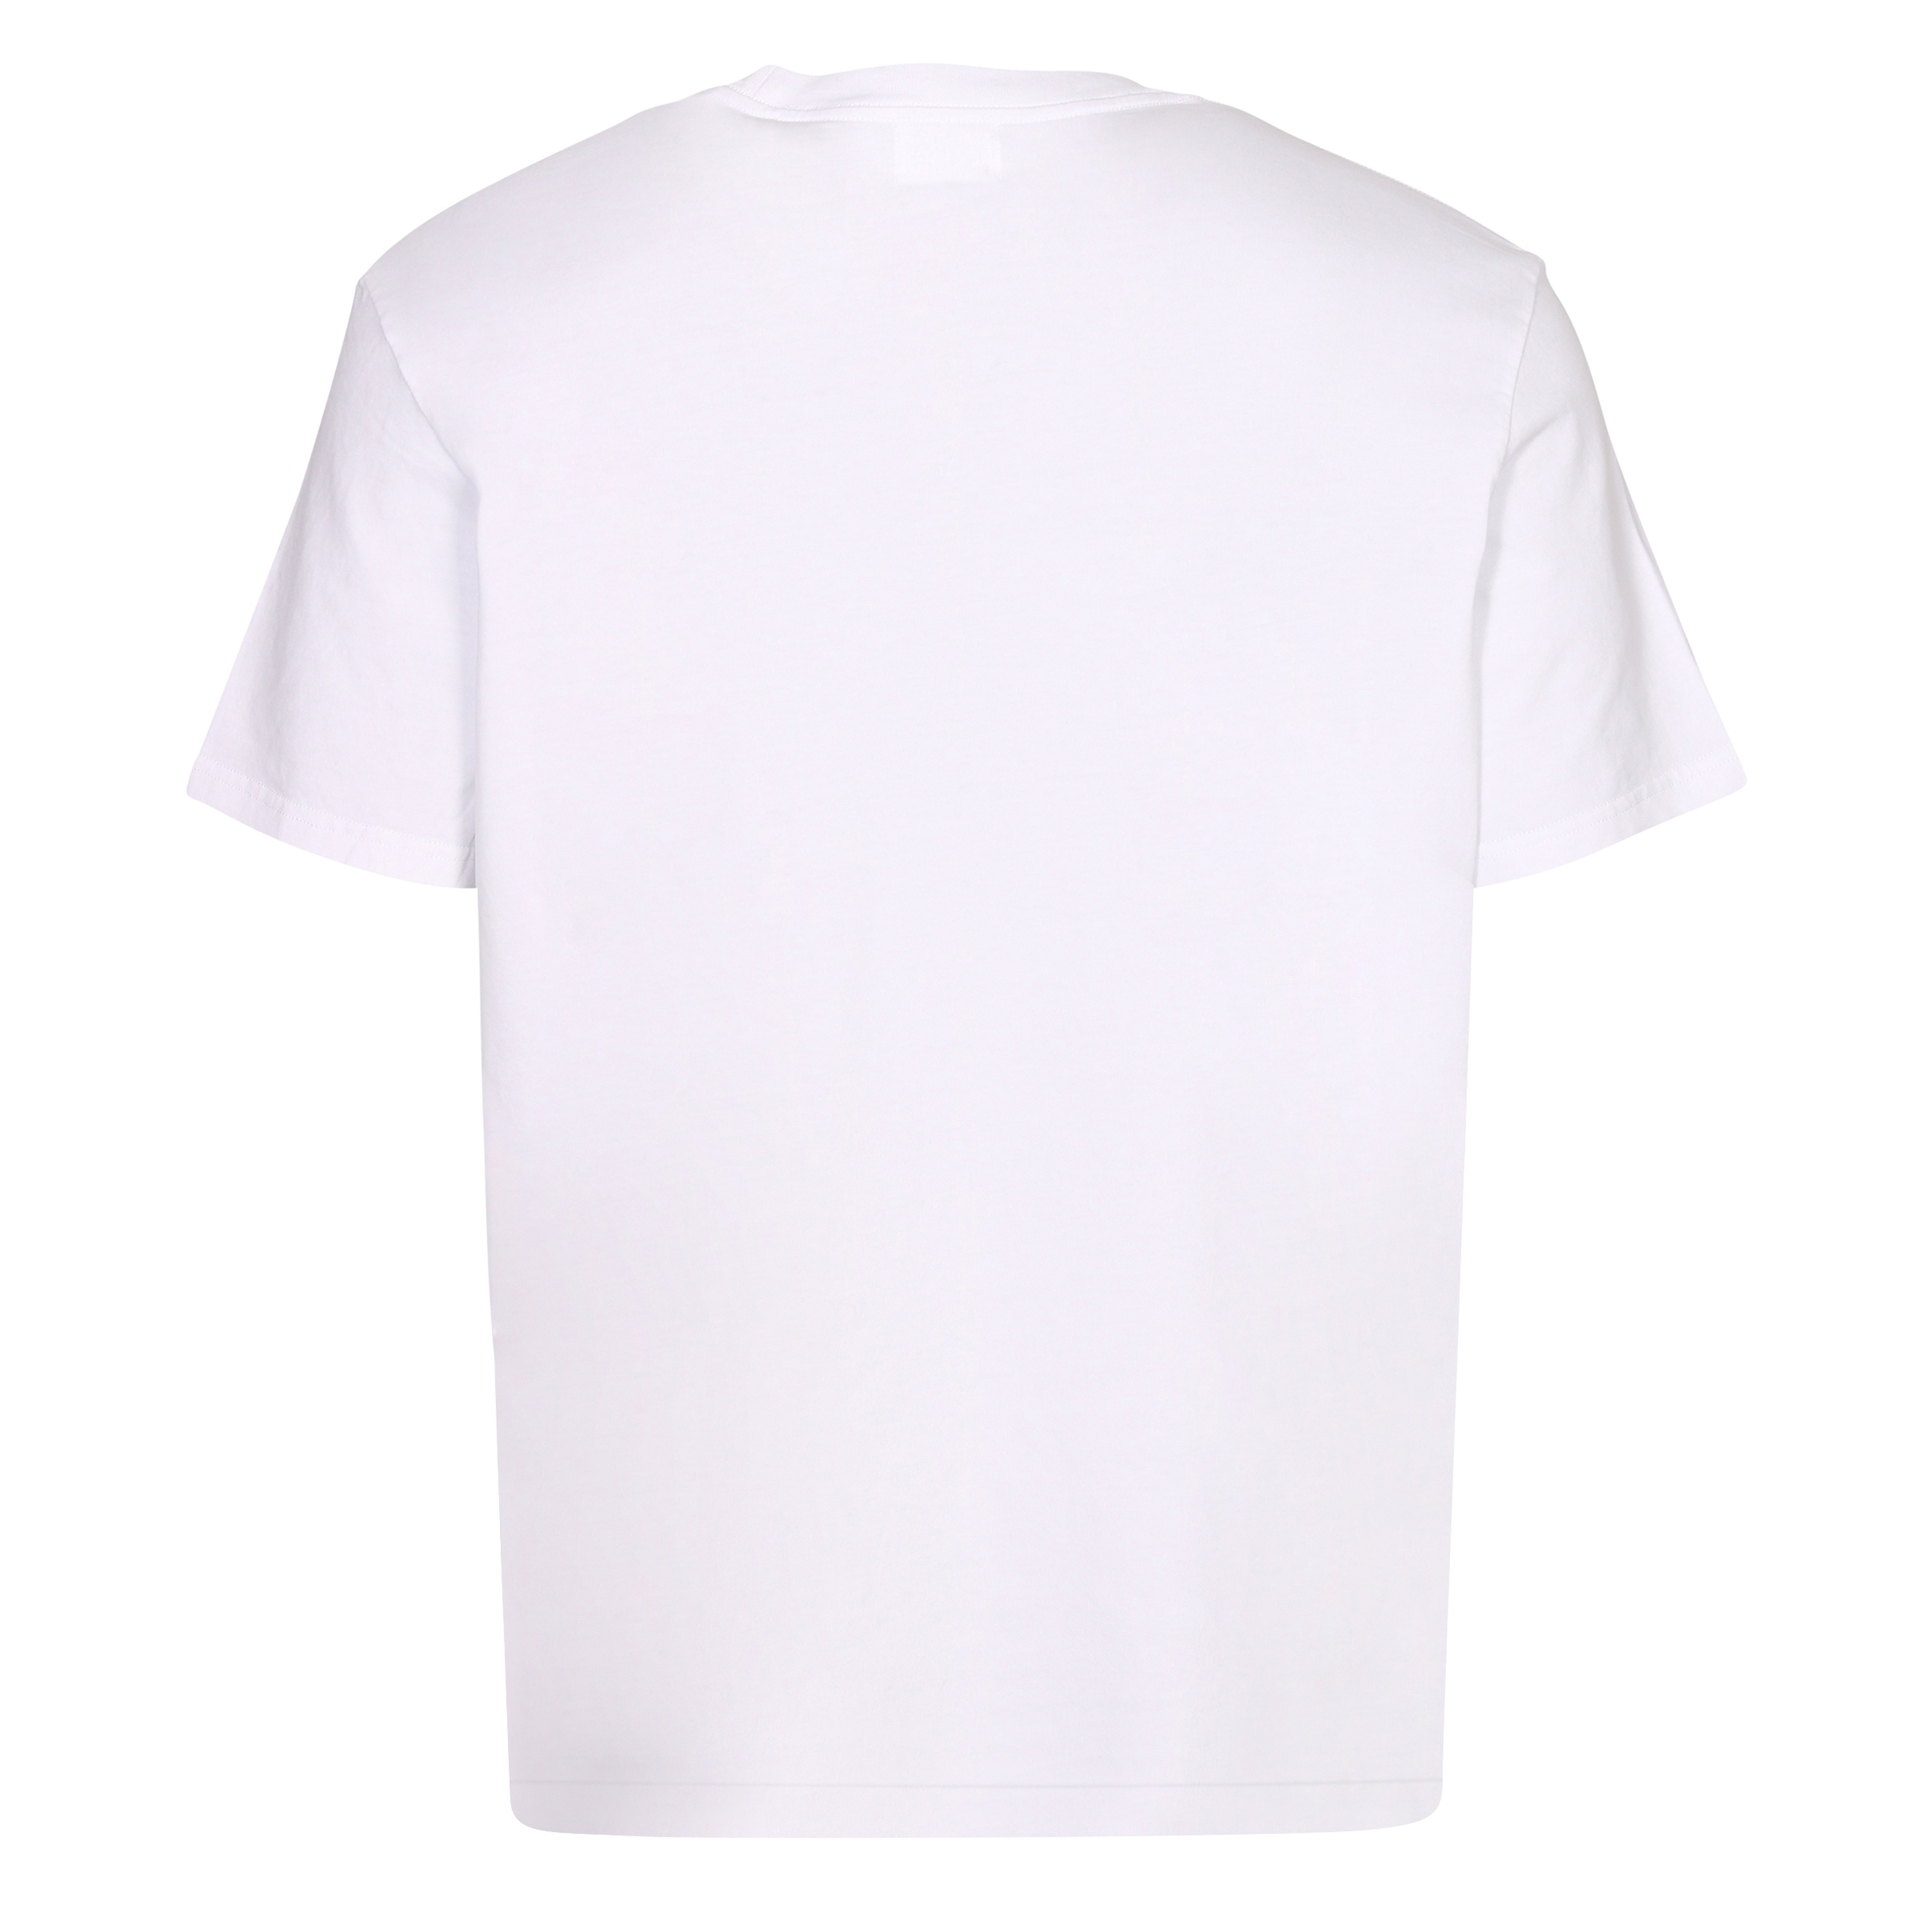 Isabel Marant Honore T-Shirt in White S